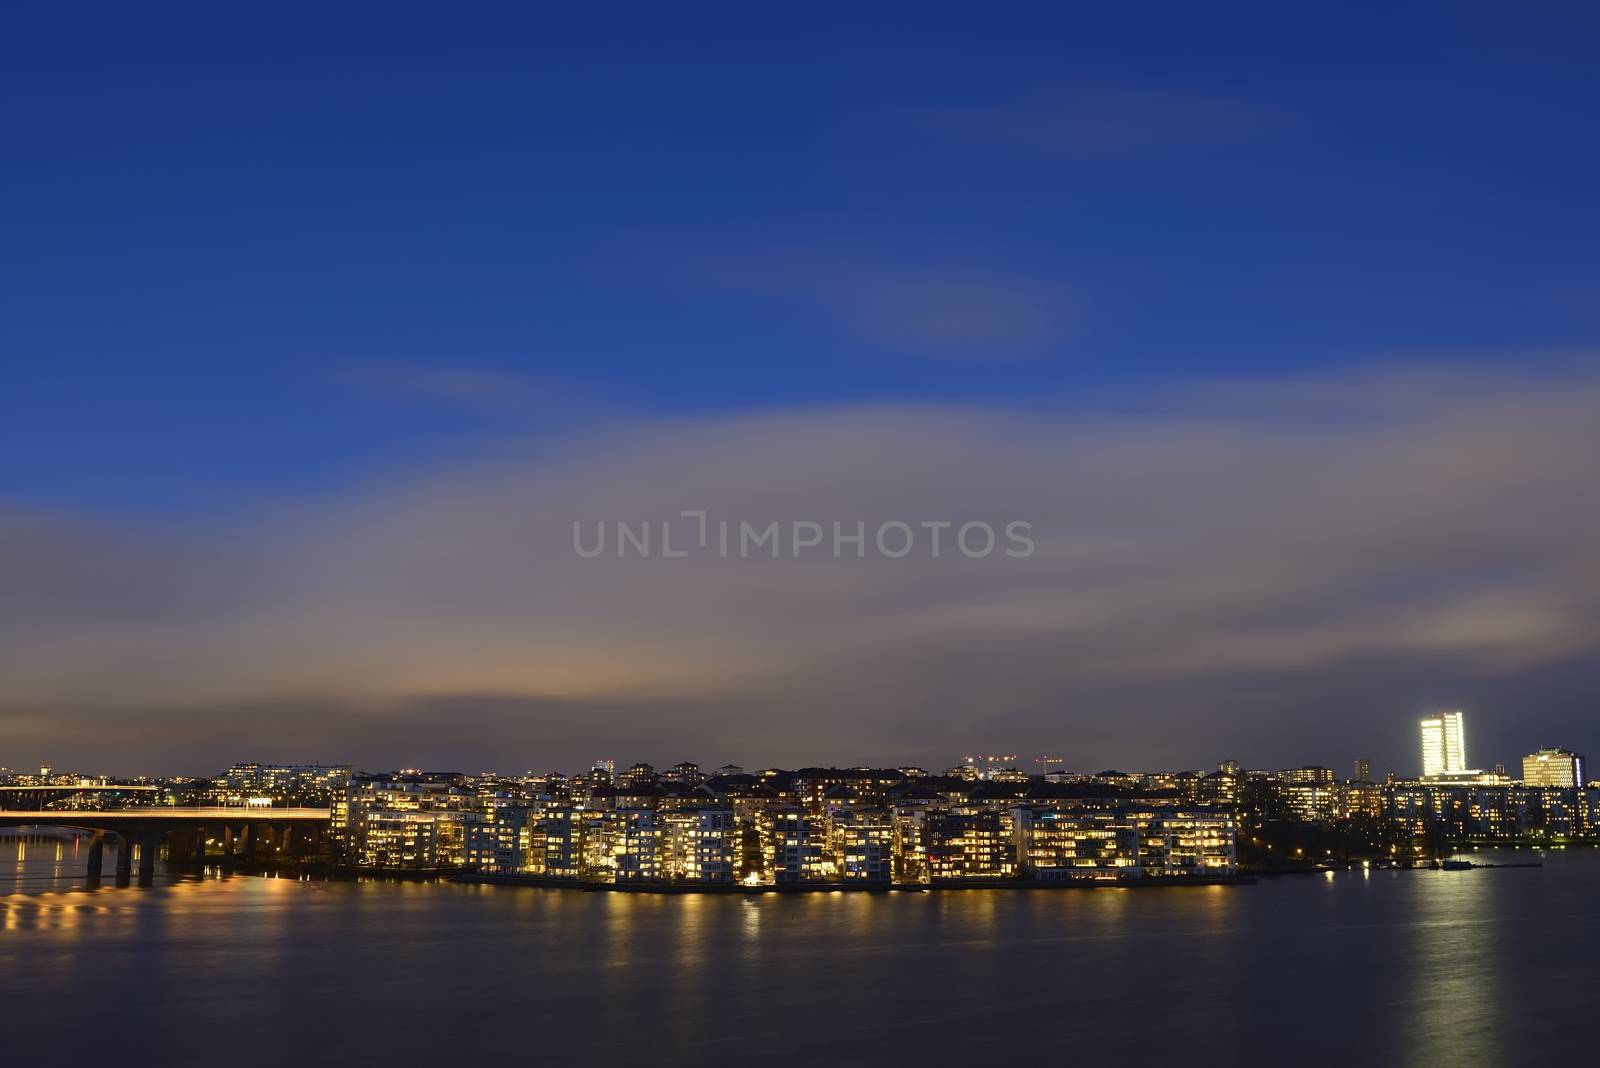 Stockholm embankment by a40757